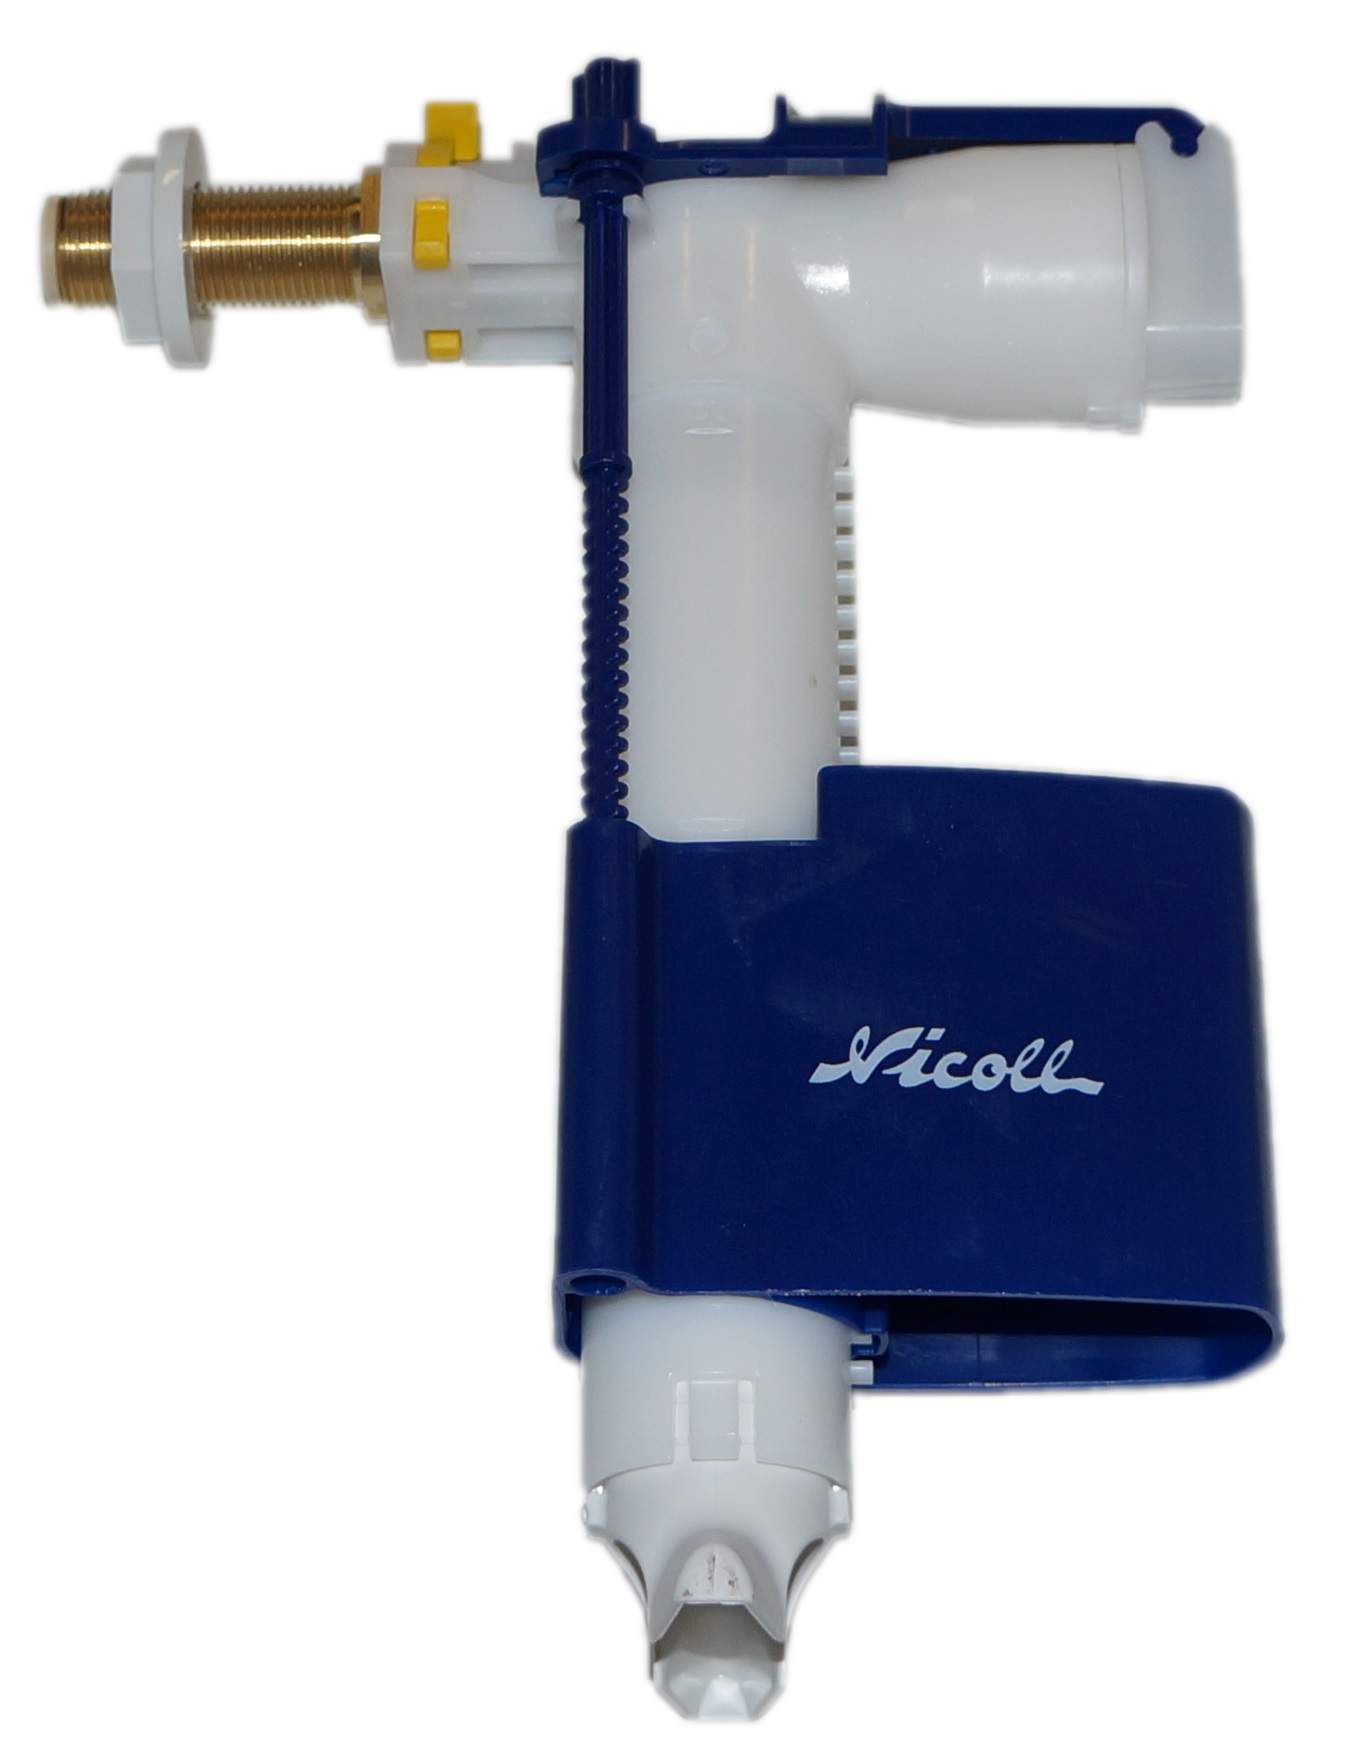 Float valve with support for Sas/Nicoll support frame